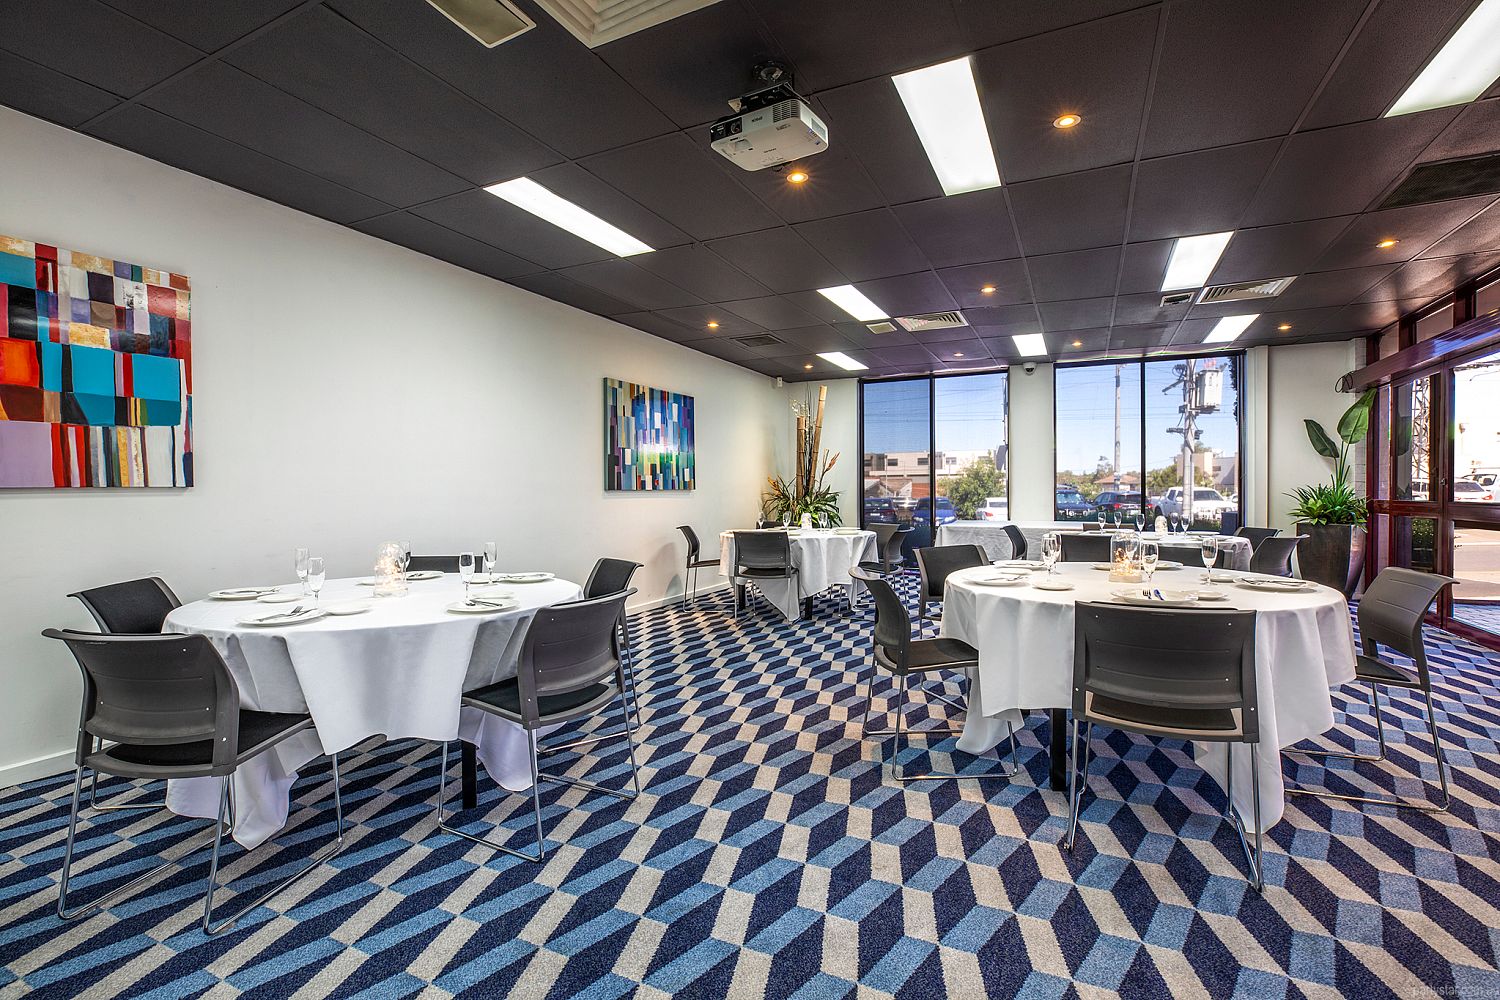 Pascoe Vale Hotel, Pascoe Vale, VIC. Function Room hire photo #1